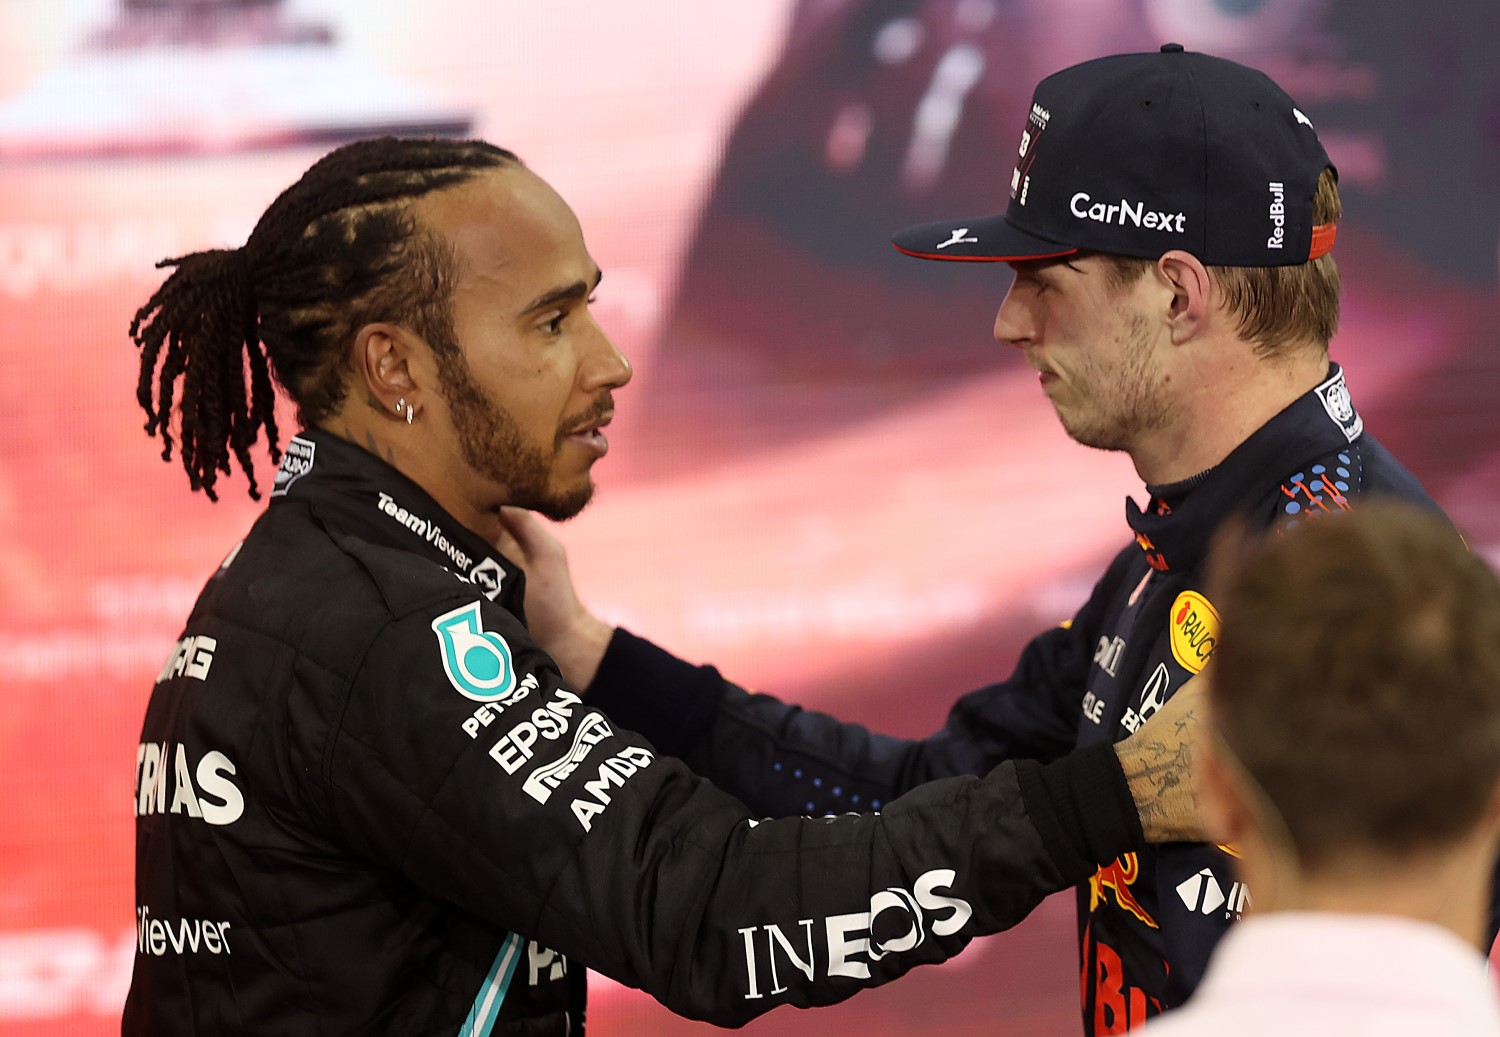 Lewis Hamilton and Max Verstappen congratulate each other on the podium